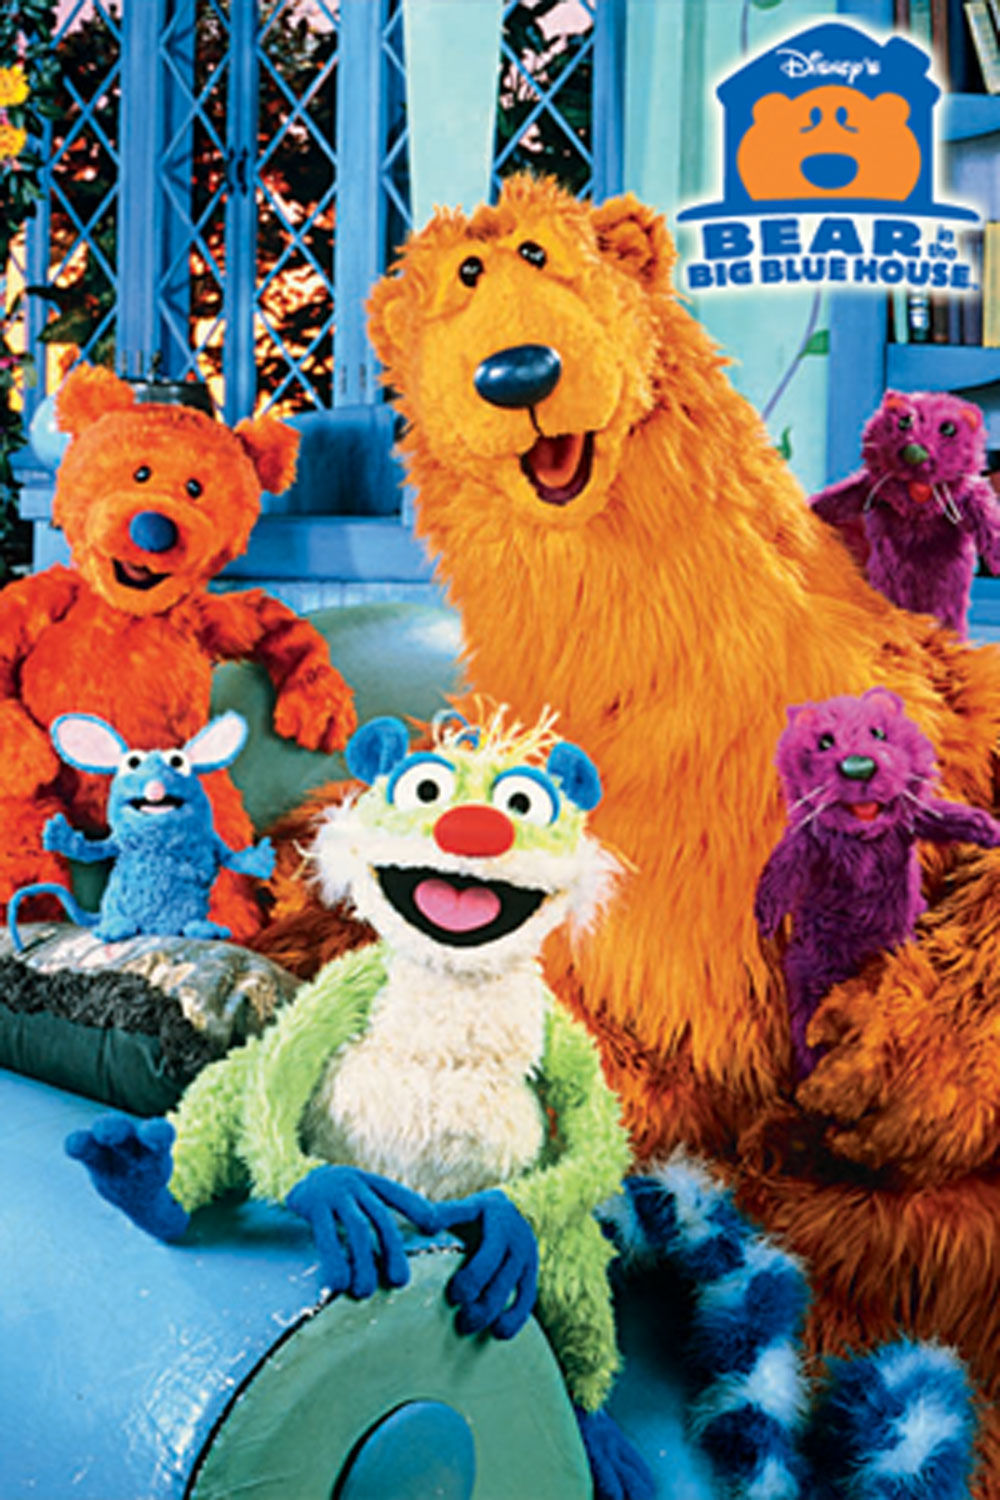 Bear in the Big Blue House. The Dubbing Database